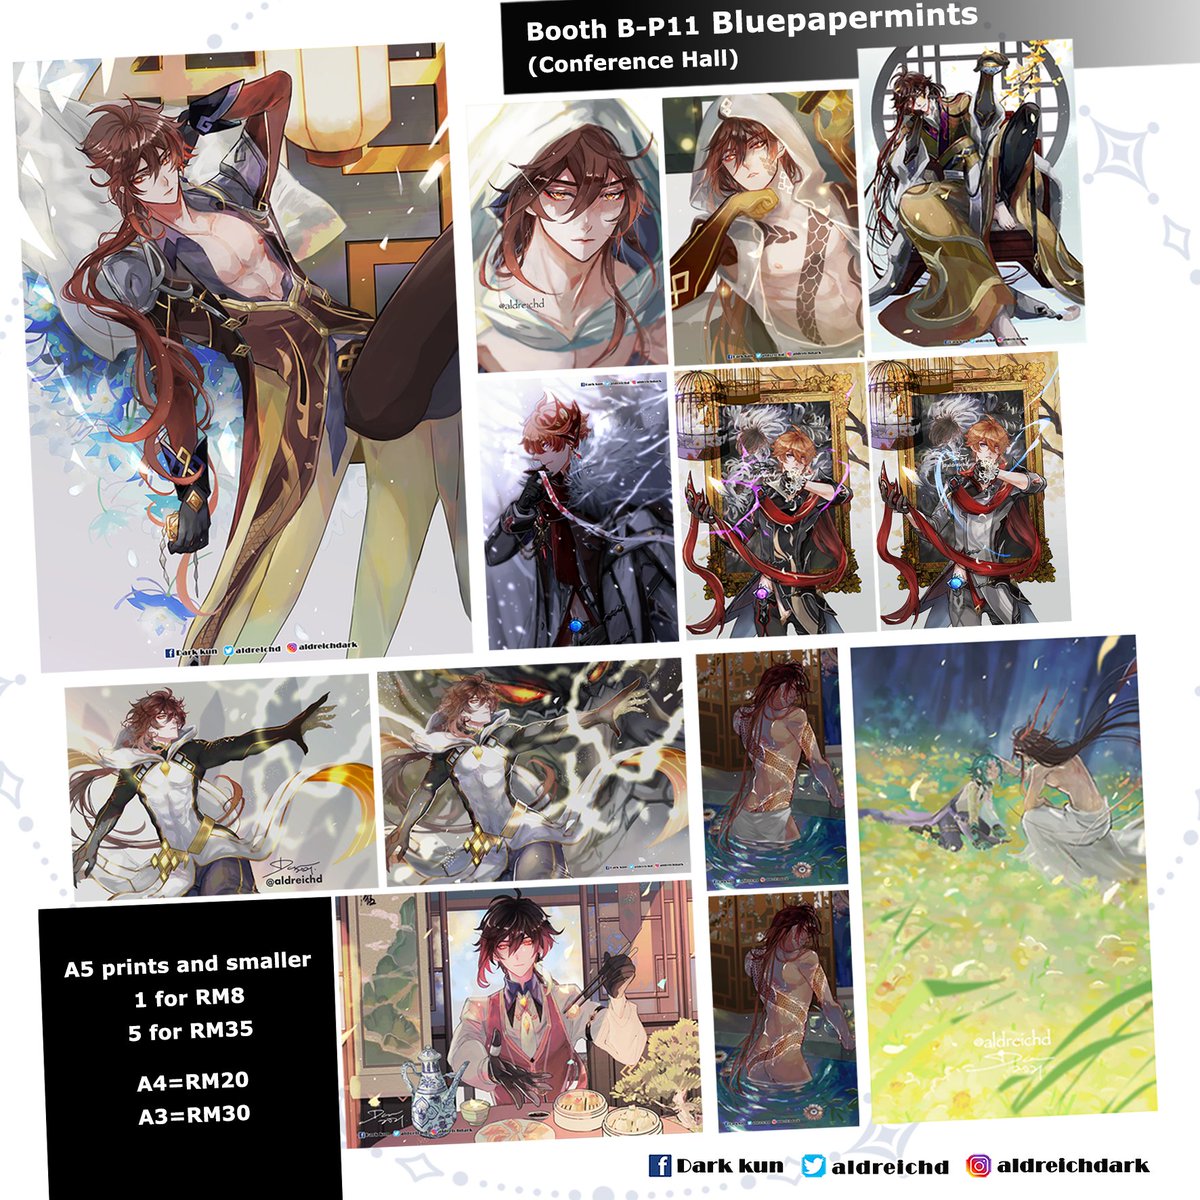 Comic Fiesta catalogue Part 2

Going with FULL Genshin Catalogue this round!

Booth B-P11 Bluepapermints (Level 3, Conference Hall)

#comicfiesta2022 #comicfiesta #cf2022 #genshinimpact 